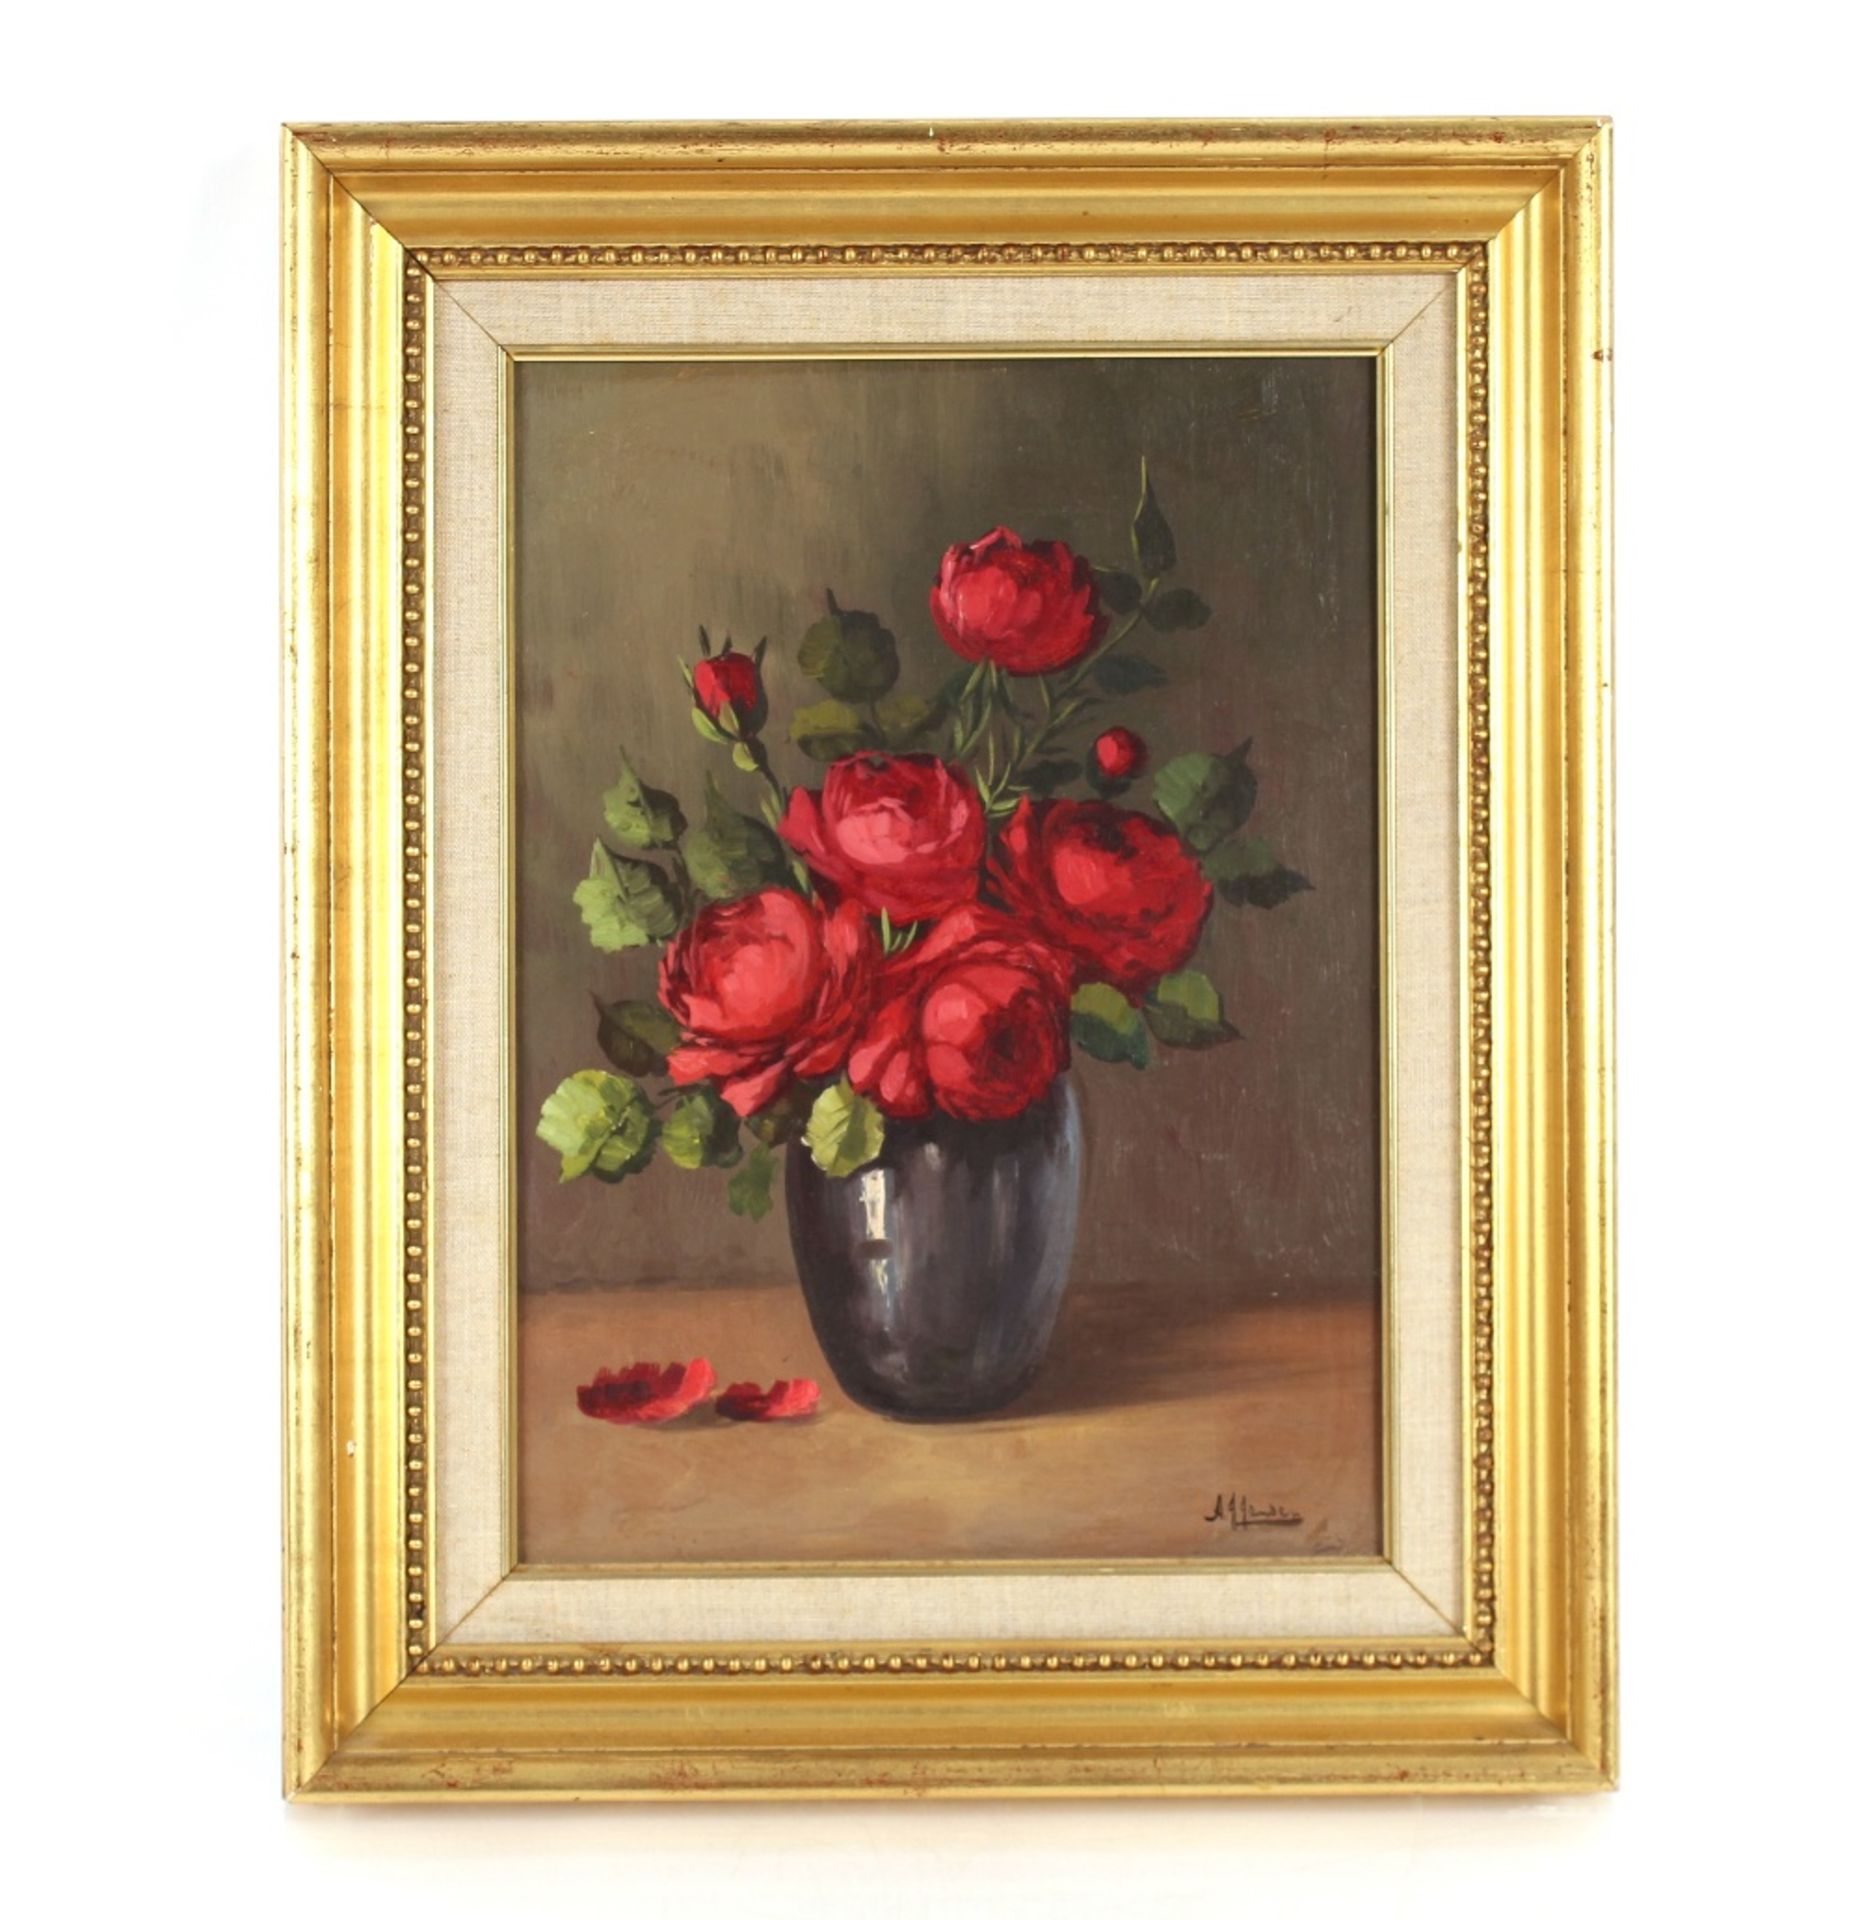 P.J. Jansen, pair of still life studies "Poppies" and "Roses" signed oils on board 37.5cm x 26.5cm - Image 2 of 6